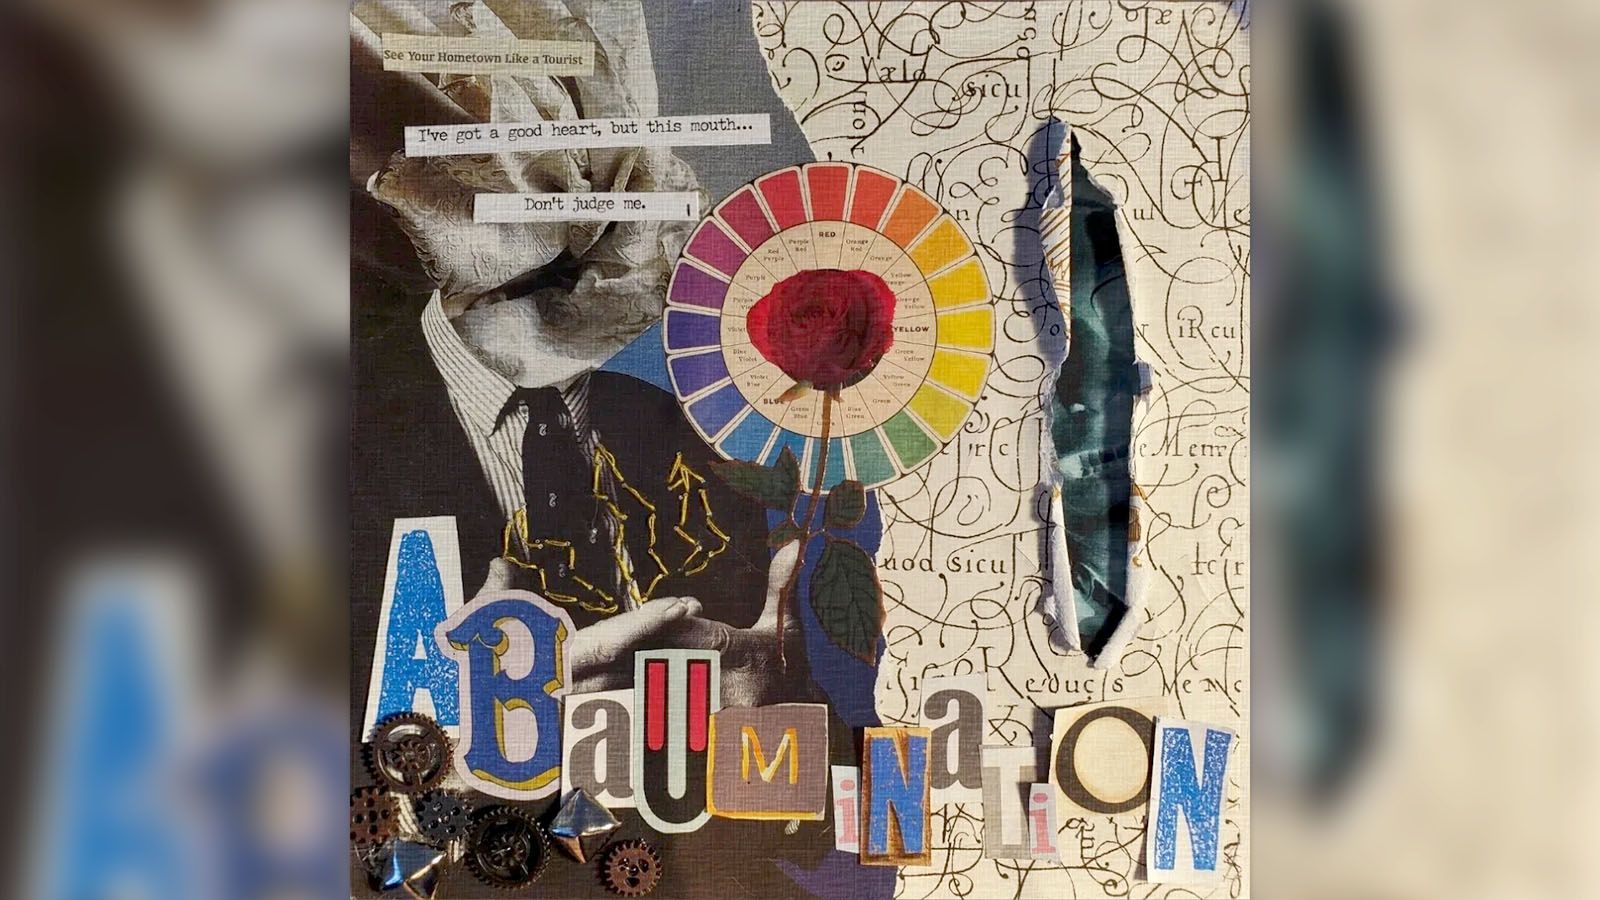 ABaumination is a collection of music recorded by Sweetwater Music Store employees.